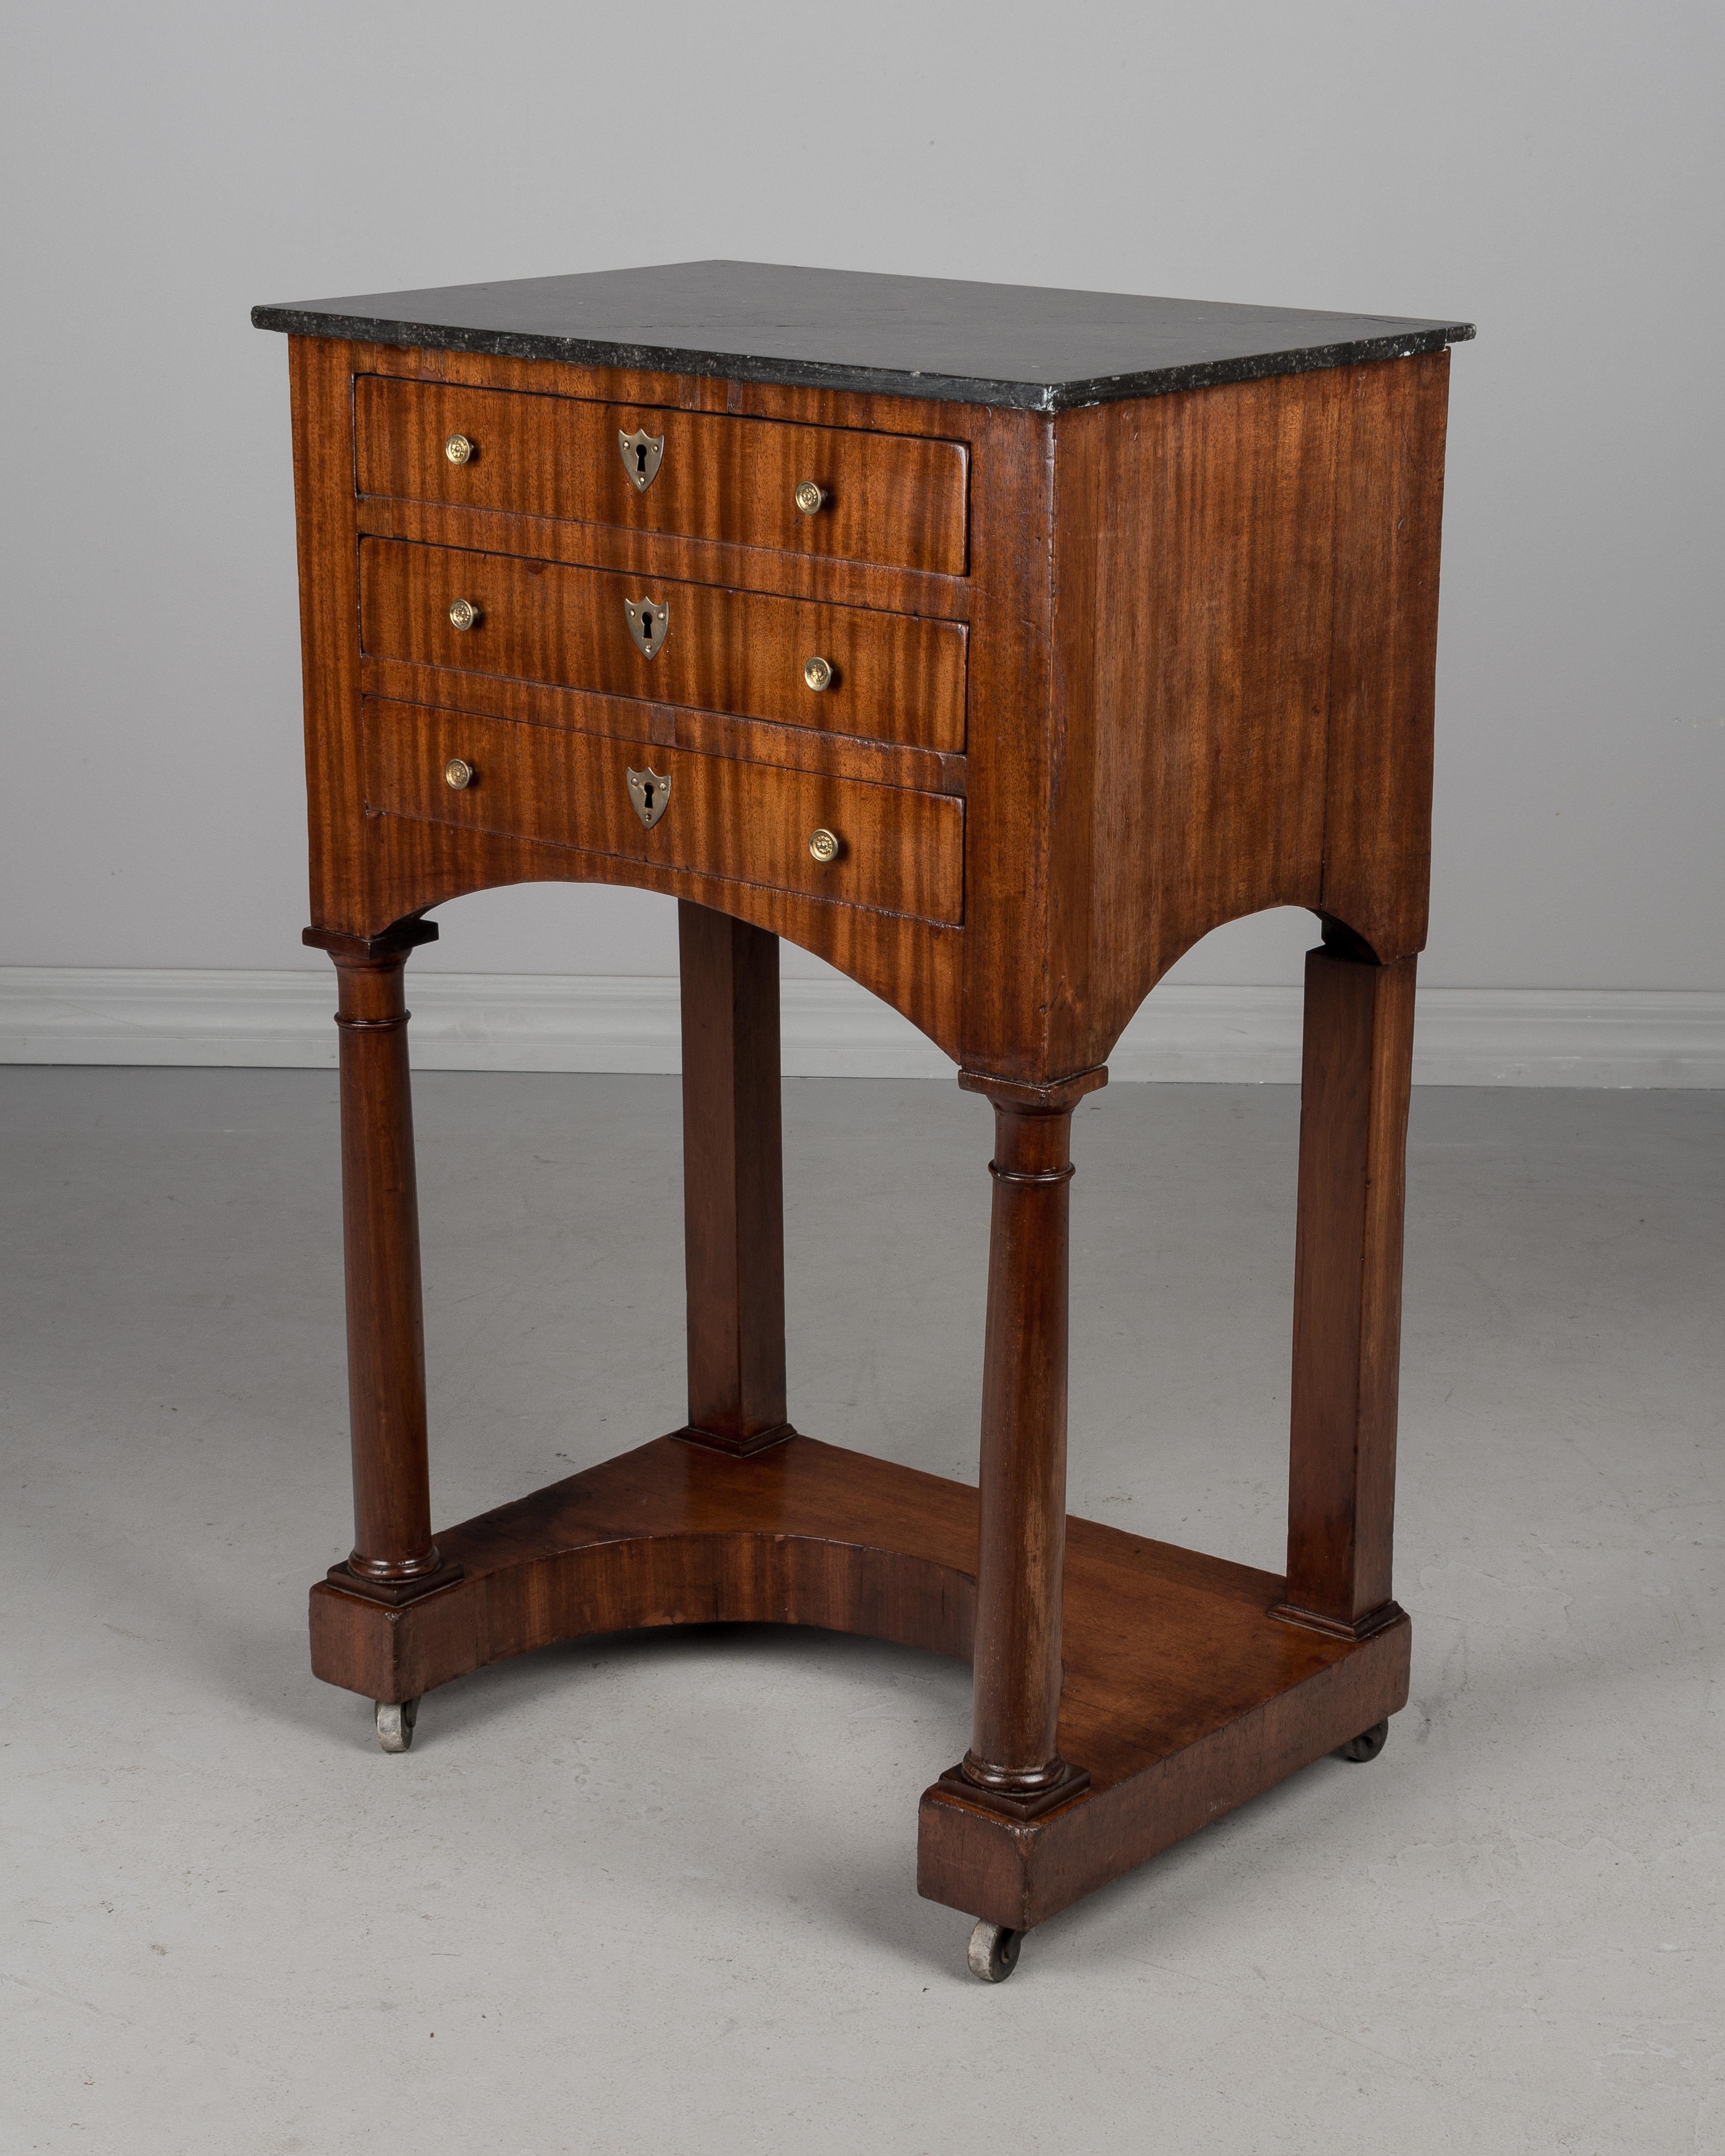 A fine 19th century French Empire marble-top side table made of mahogany veneer with solid oak as a secondary wood. Three dovetailed drawers with original bronze hardware. No key. Original castors. French polish finish. Marble-top was cracked and